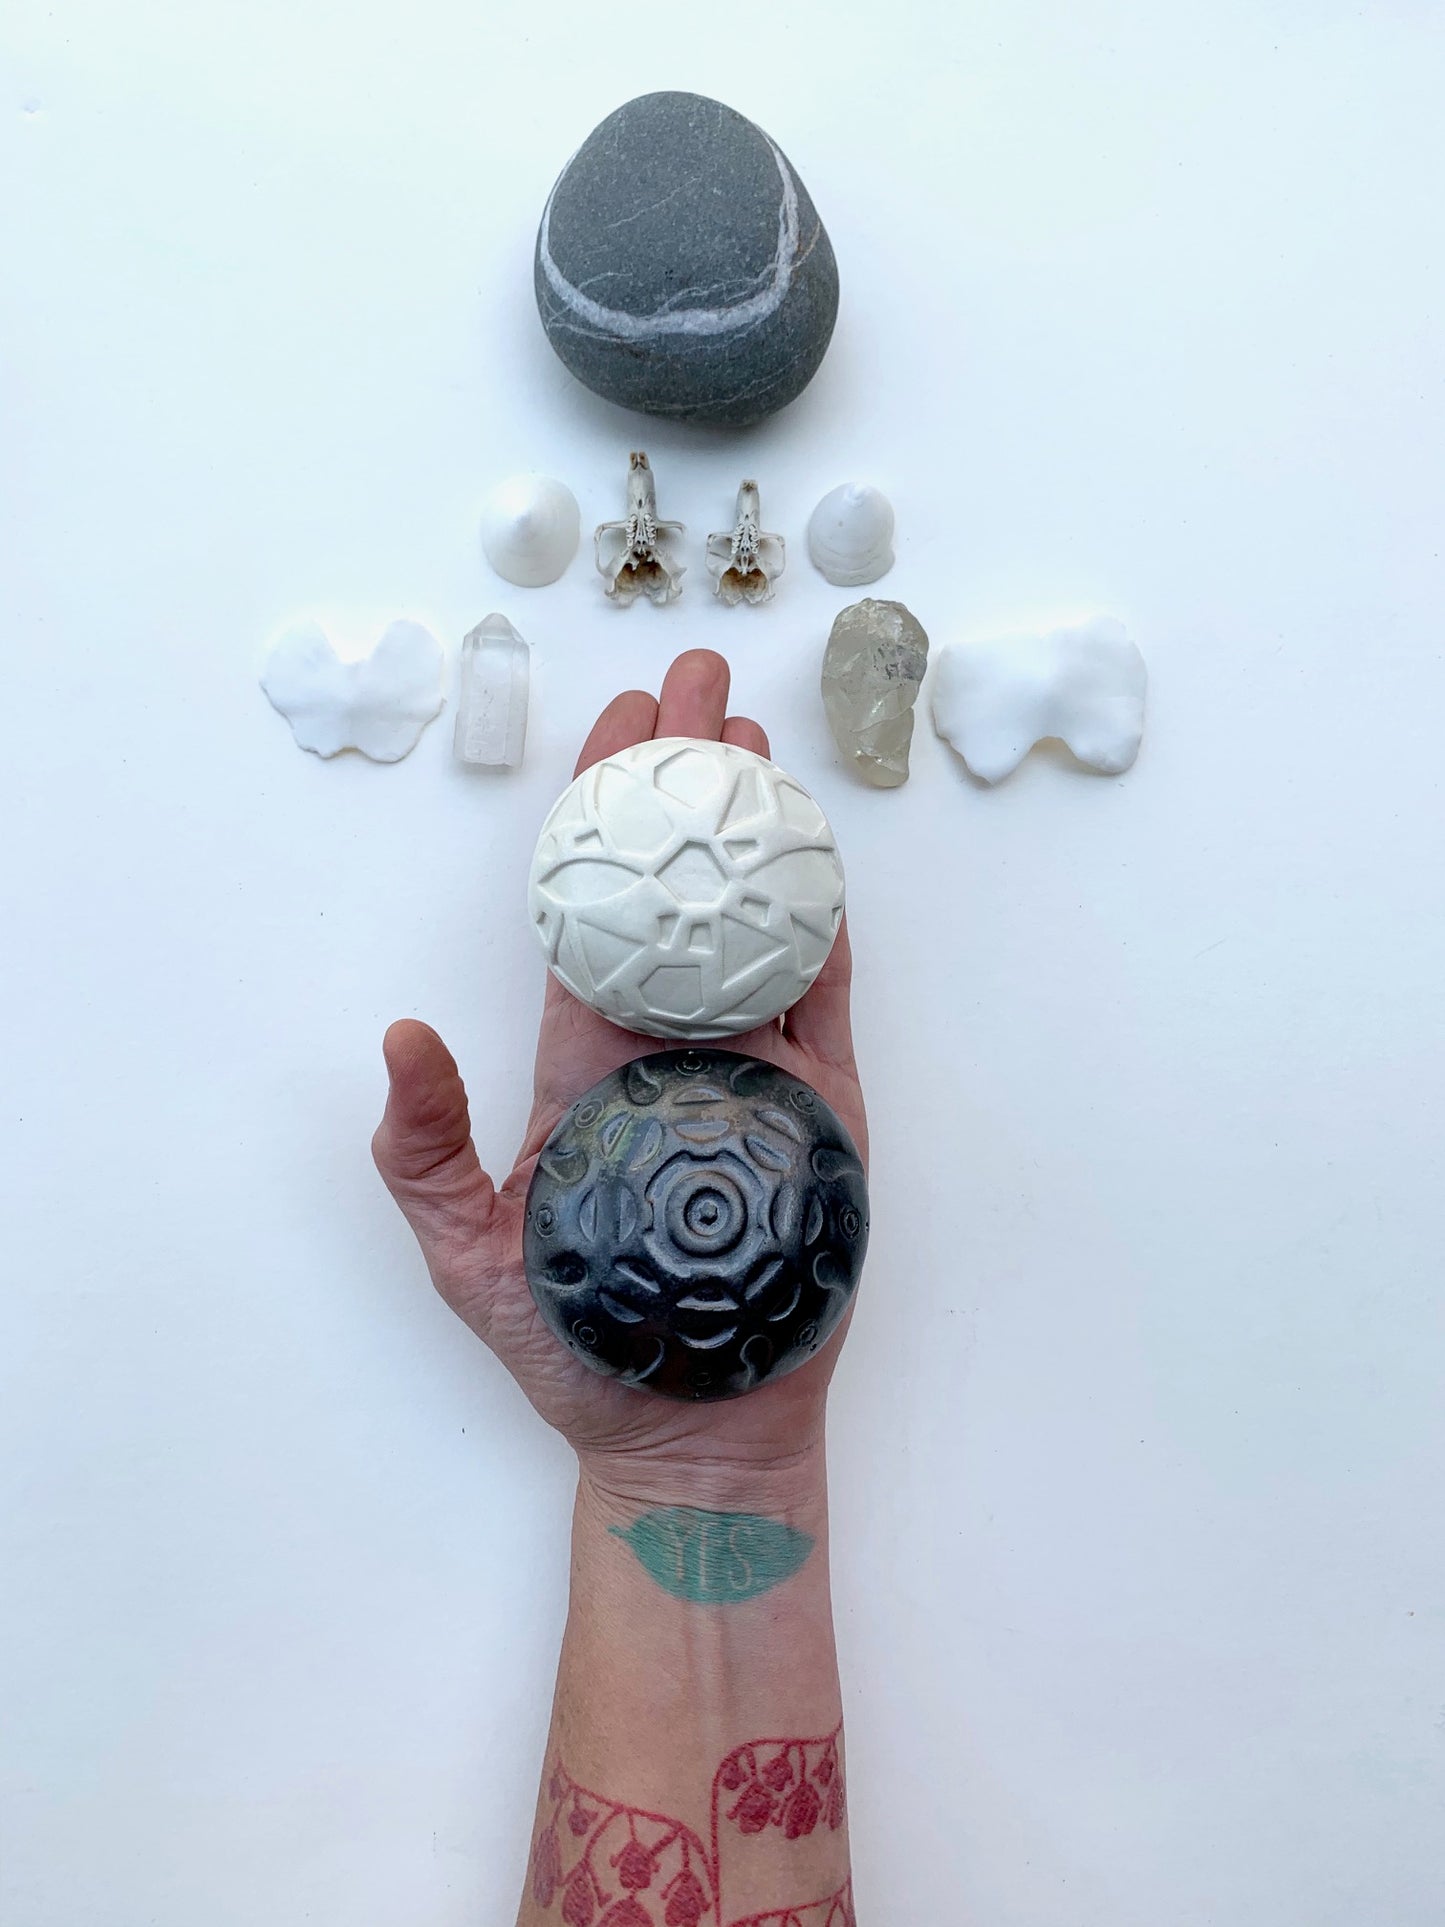 sold - meditation sculptures / one of a kind ceramic pieces for sacred spaces